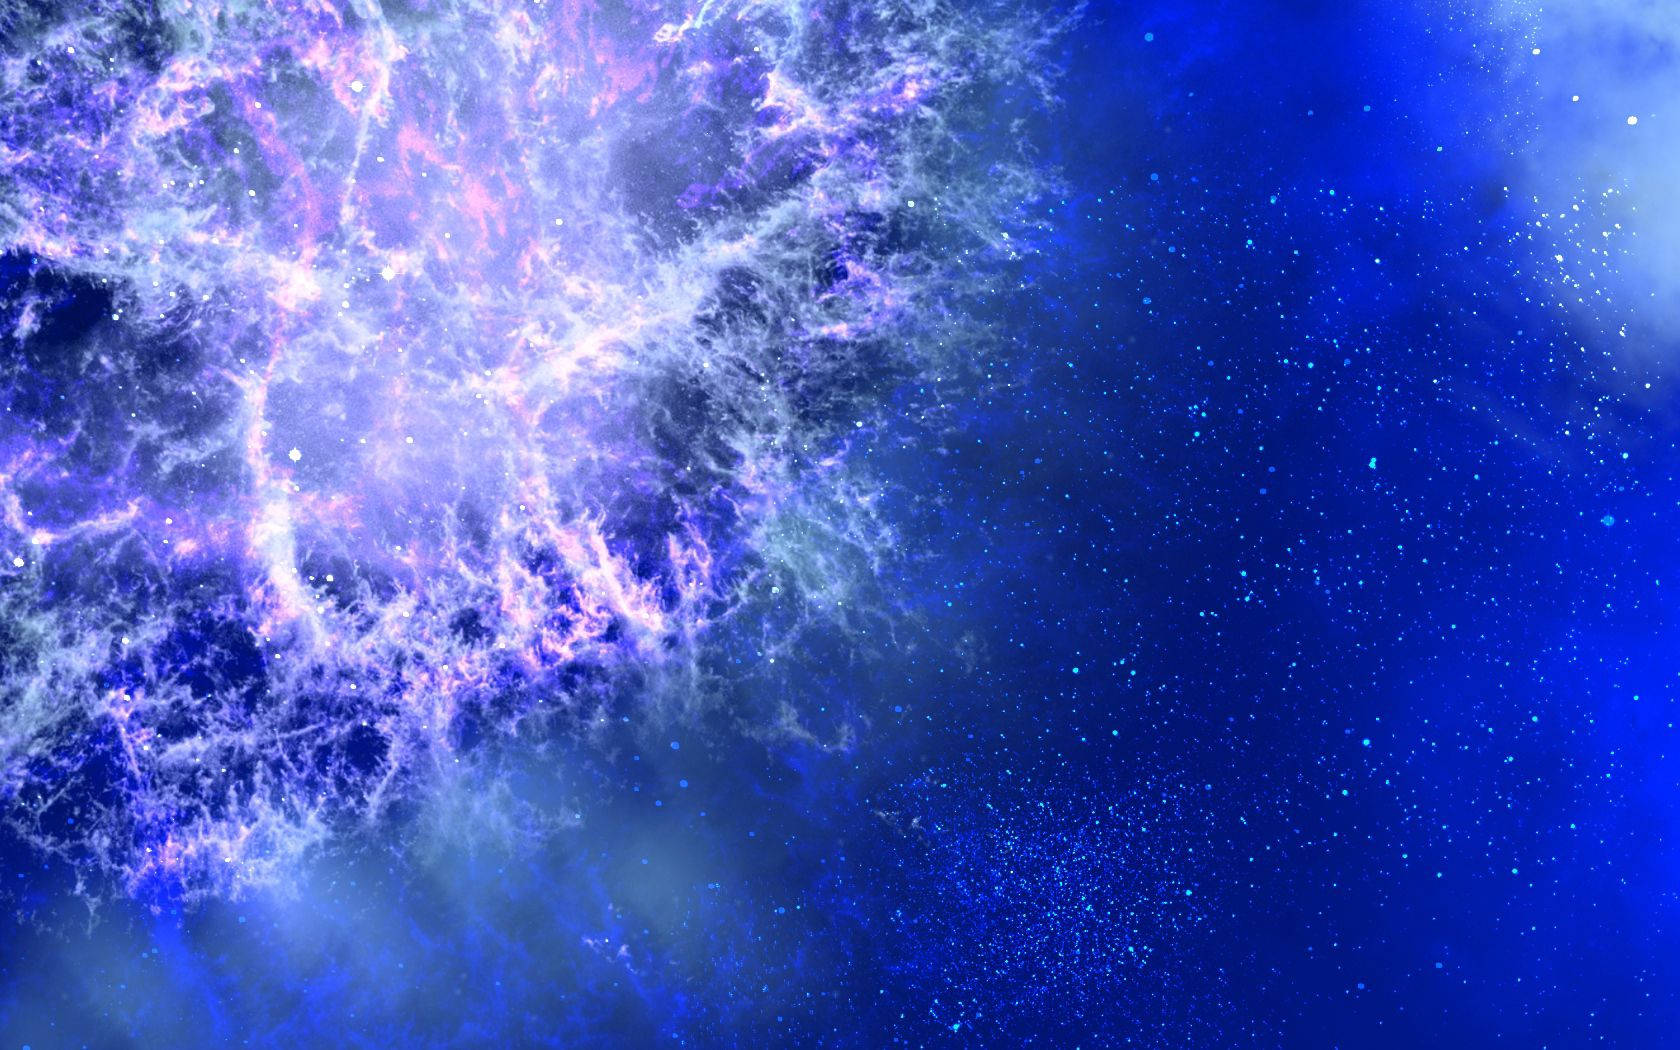 A Blue And Purple Space With A Nebula Background